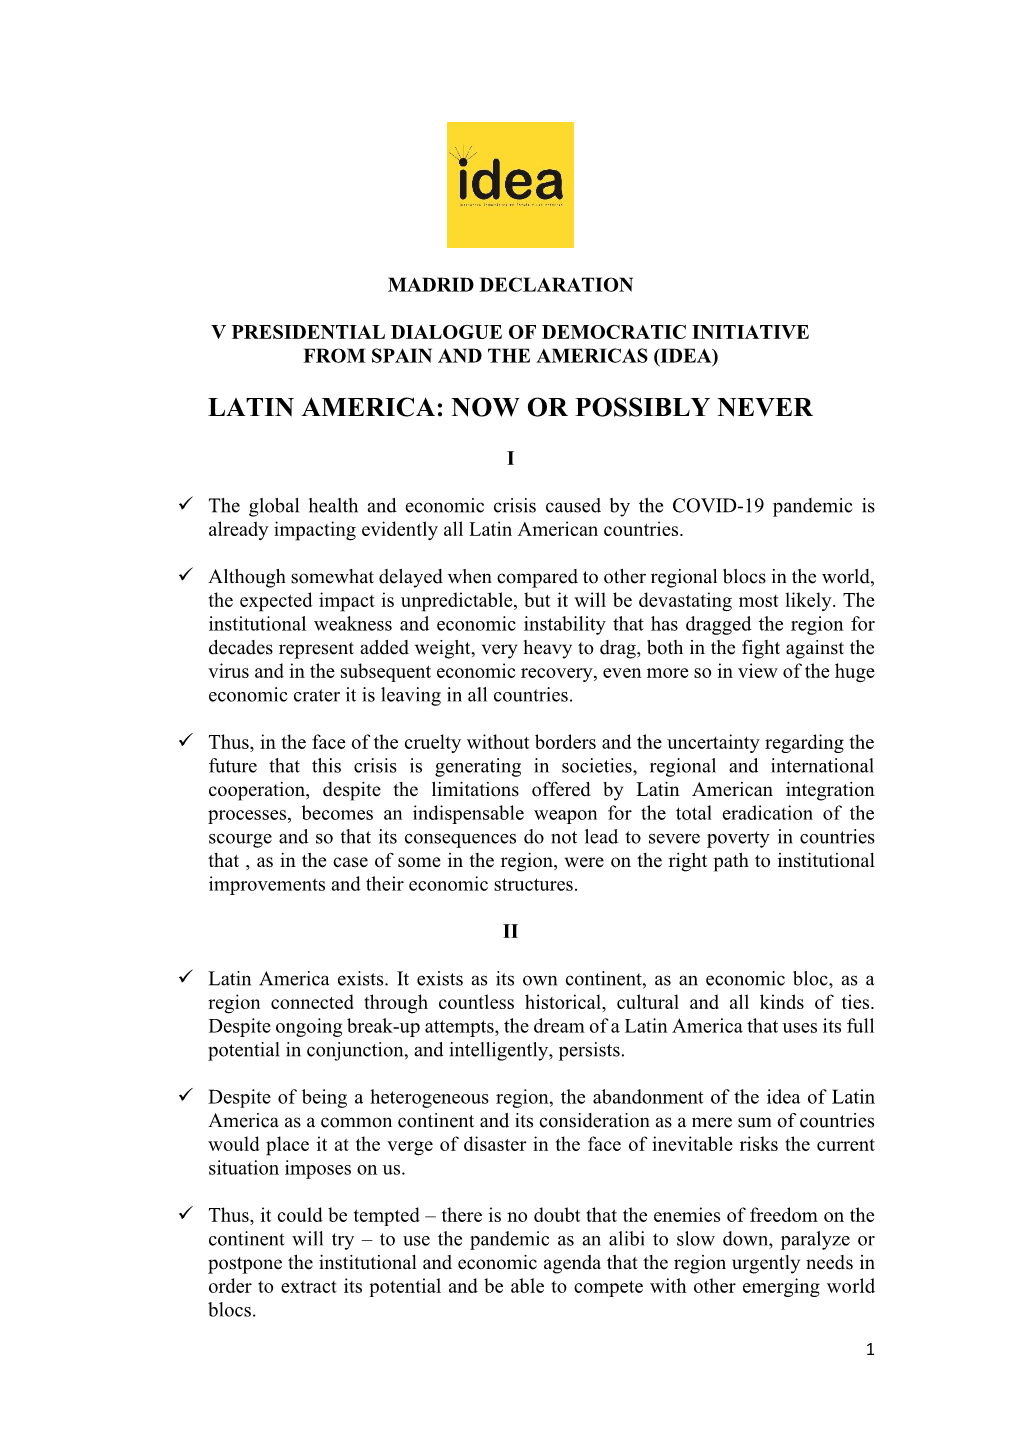 Latin America: Now Or Possibly Never